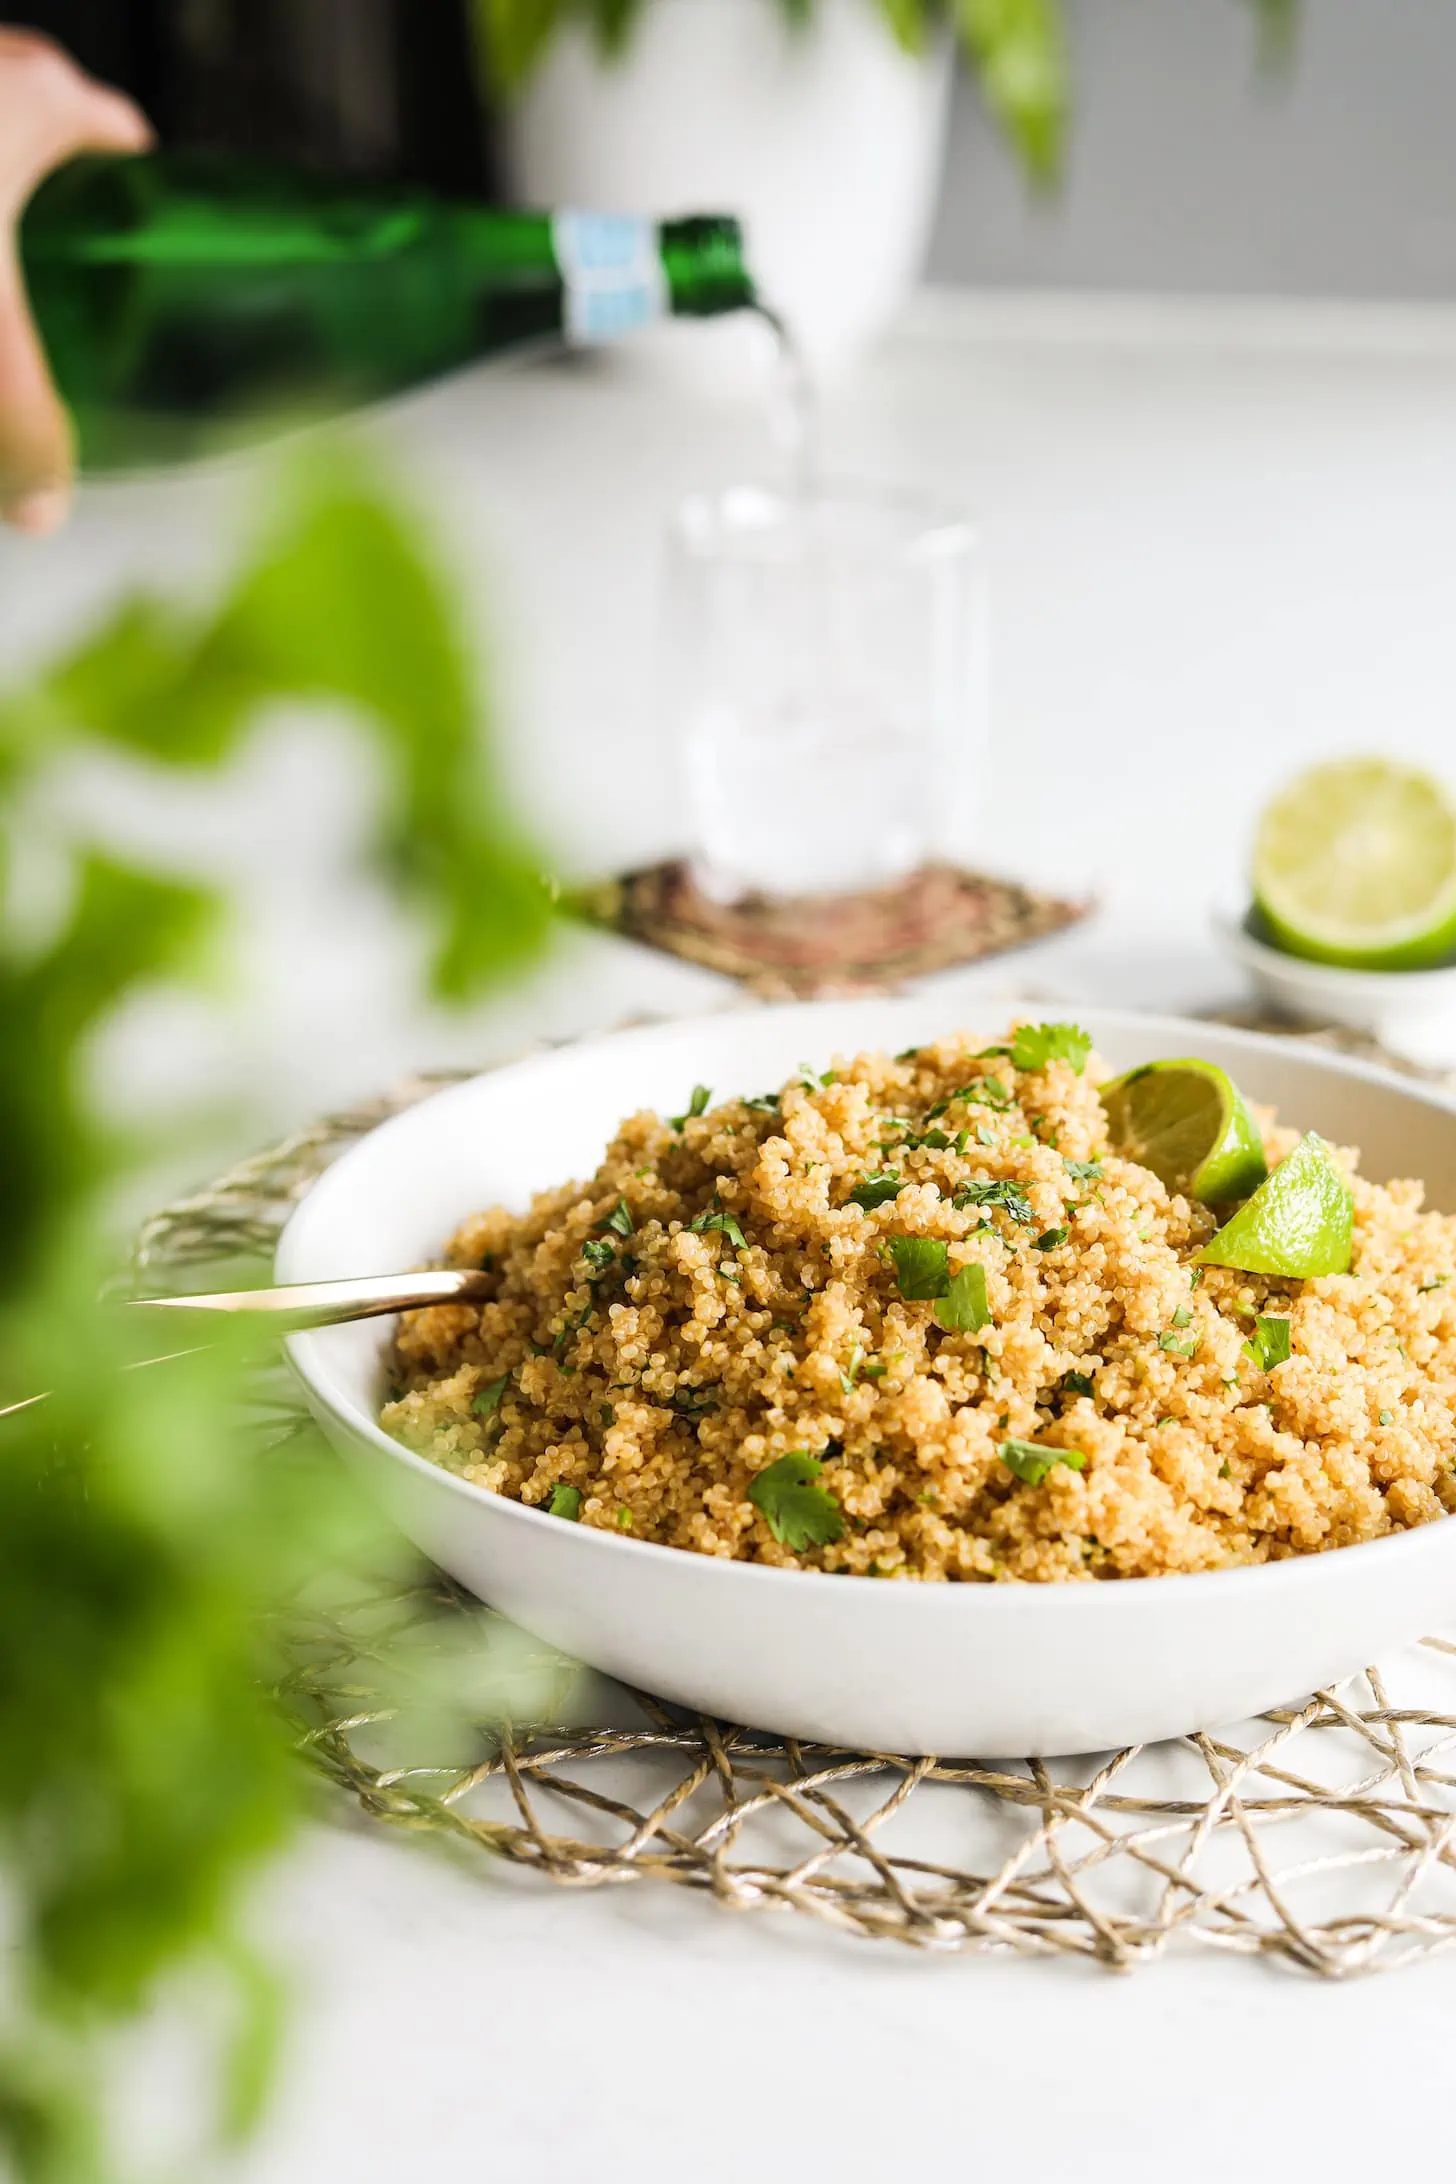 a bowl of cooked yellow quinoa topped with lime wedges and cilantro leaves. There are some greens blurred in the foreground and a hand holding a bottle of water and pouring it into a glass.